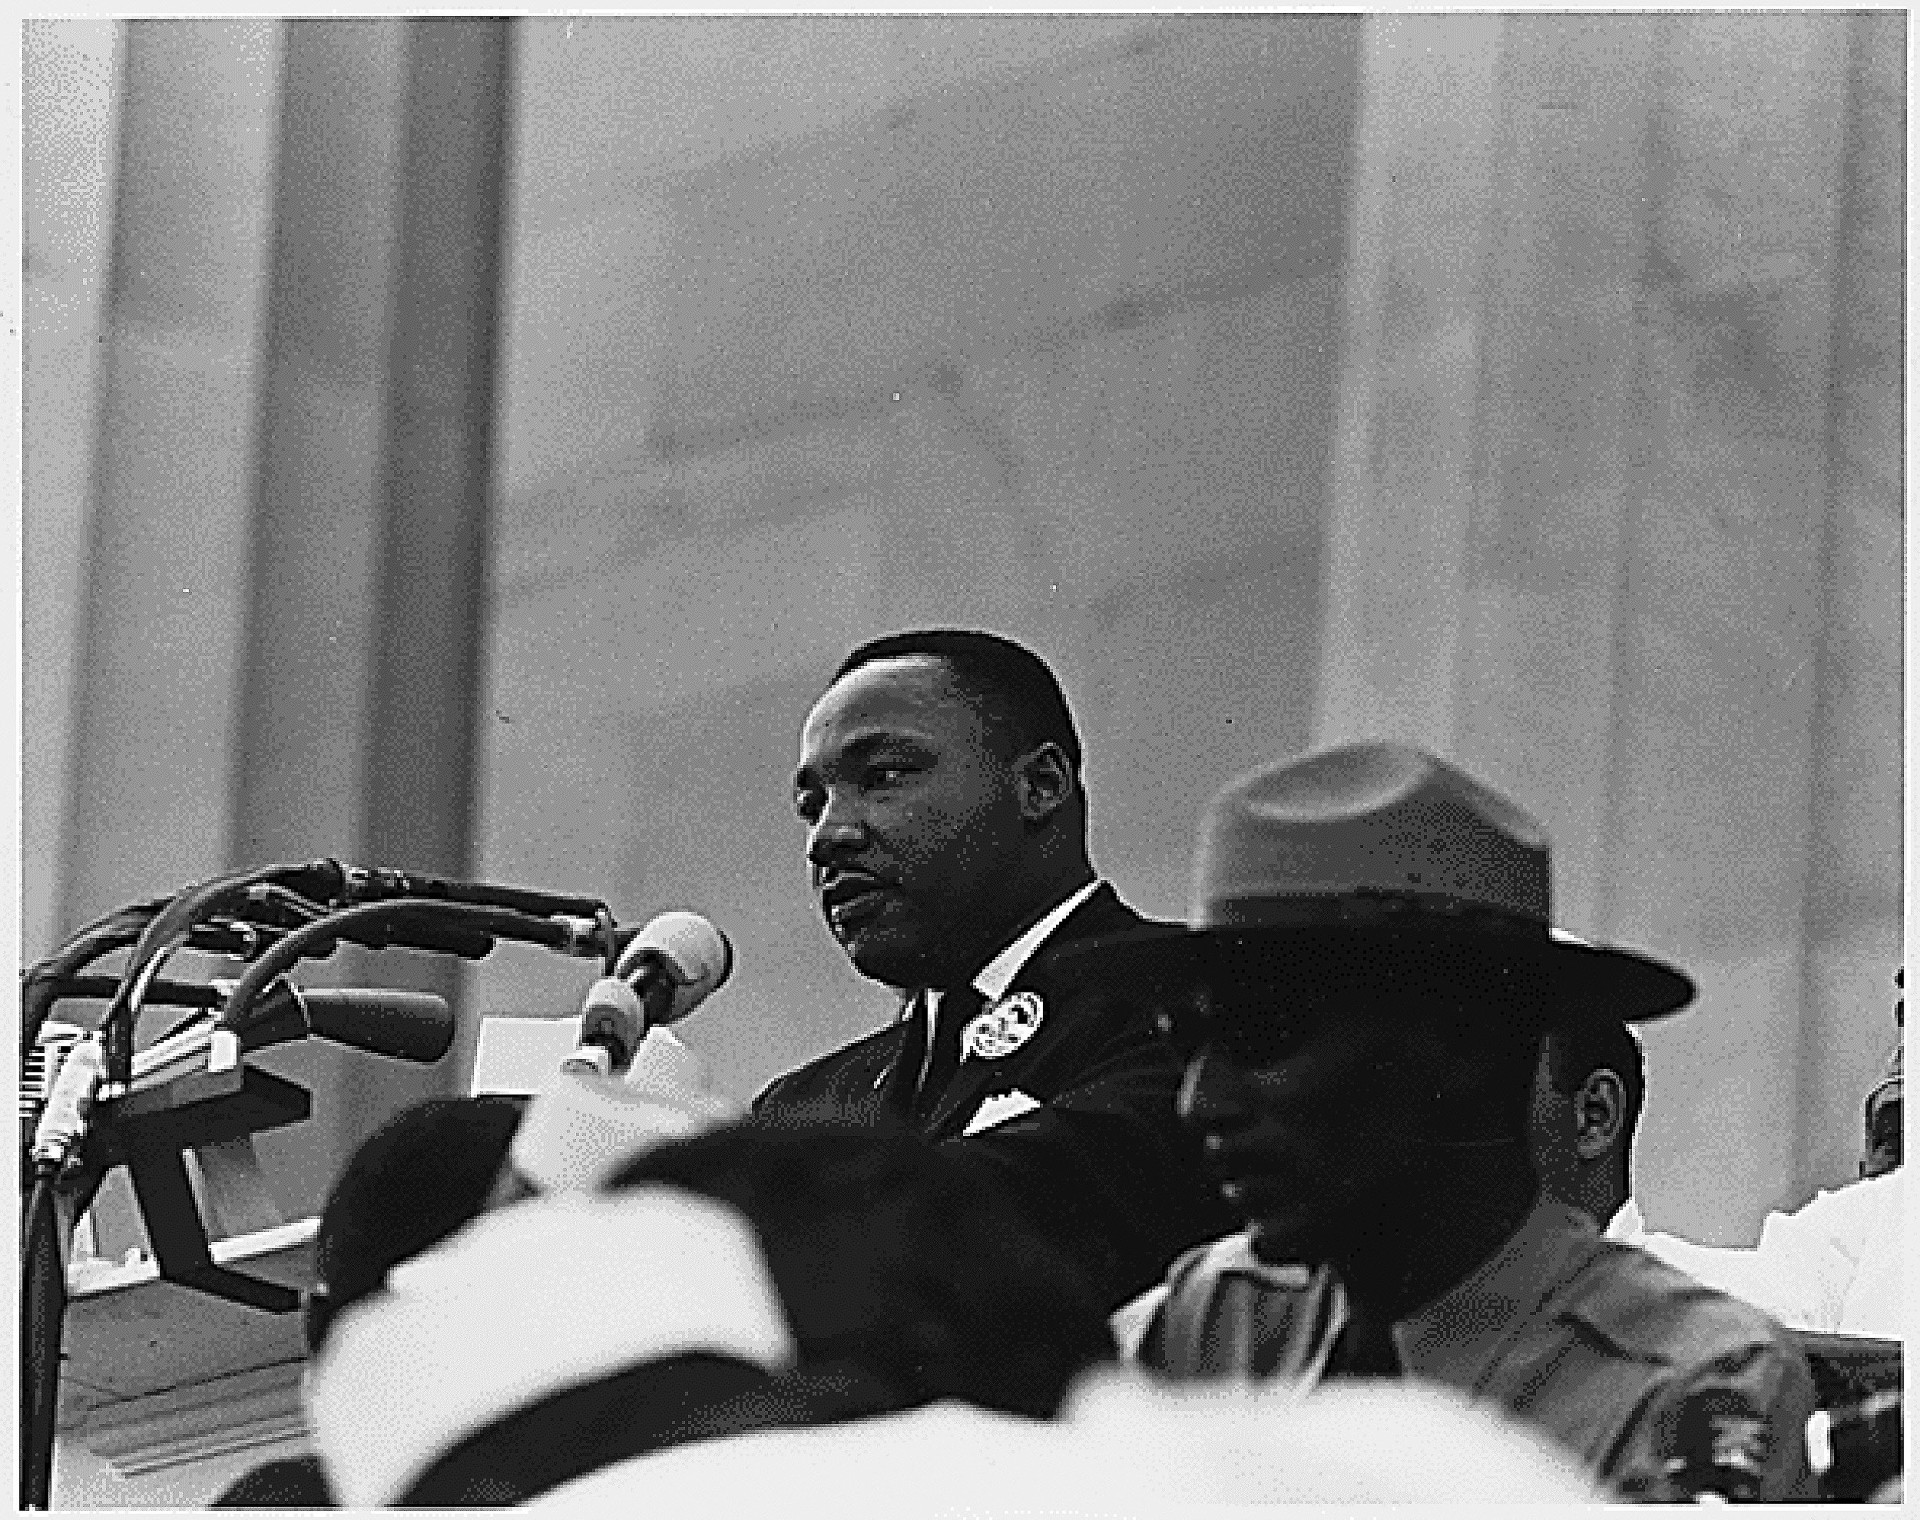 King's "I Have a Dream" was a defining moment of the civil rights movement, and remains one of the most evocative public speeches ever made.<p><a href="https://www.msn.com/en-us/community/channel/vid-7xx8mnucu55yw63we9va2gwr7uihbxwc68fxqp25x6tg4ftibpra?cvid=94631541bc0f4f89bfd59158d696ad7e">Follow us and access great exclusive content every day</a></p>